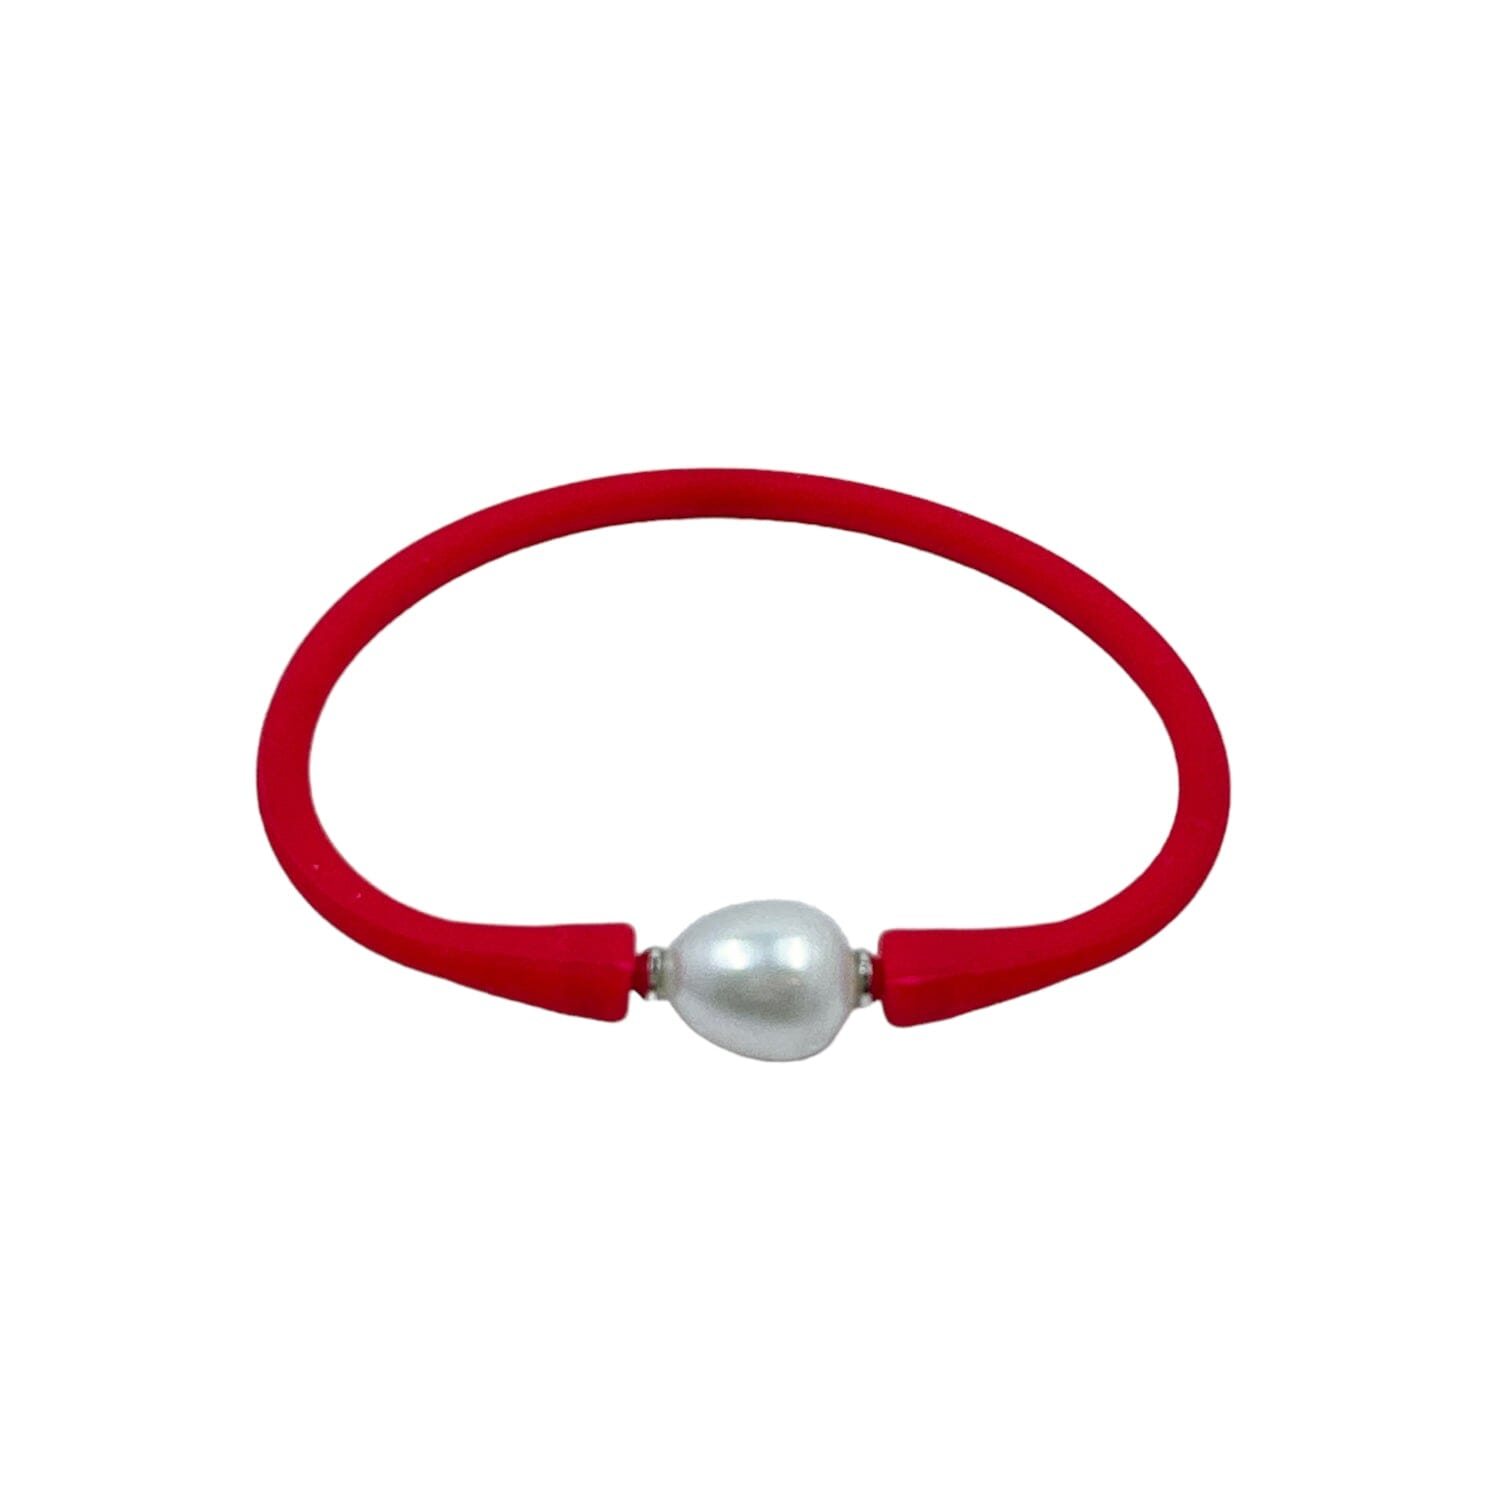 11mm Cultured White Pearl and Red Silicone Bracelet Bracelets TRENDZIO Red 